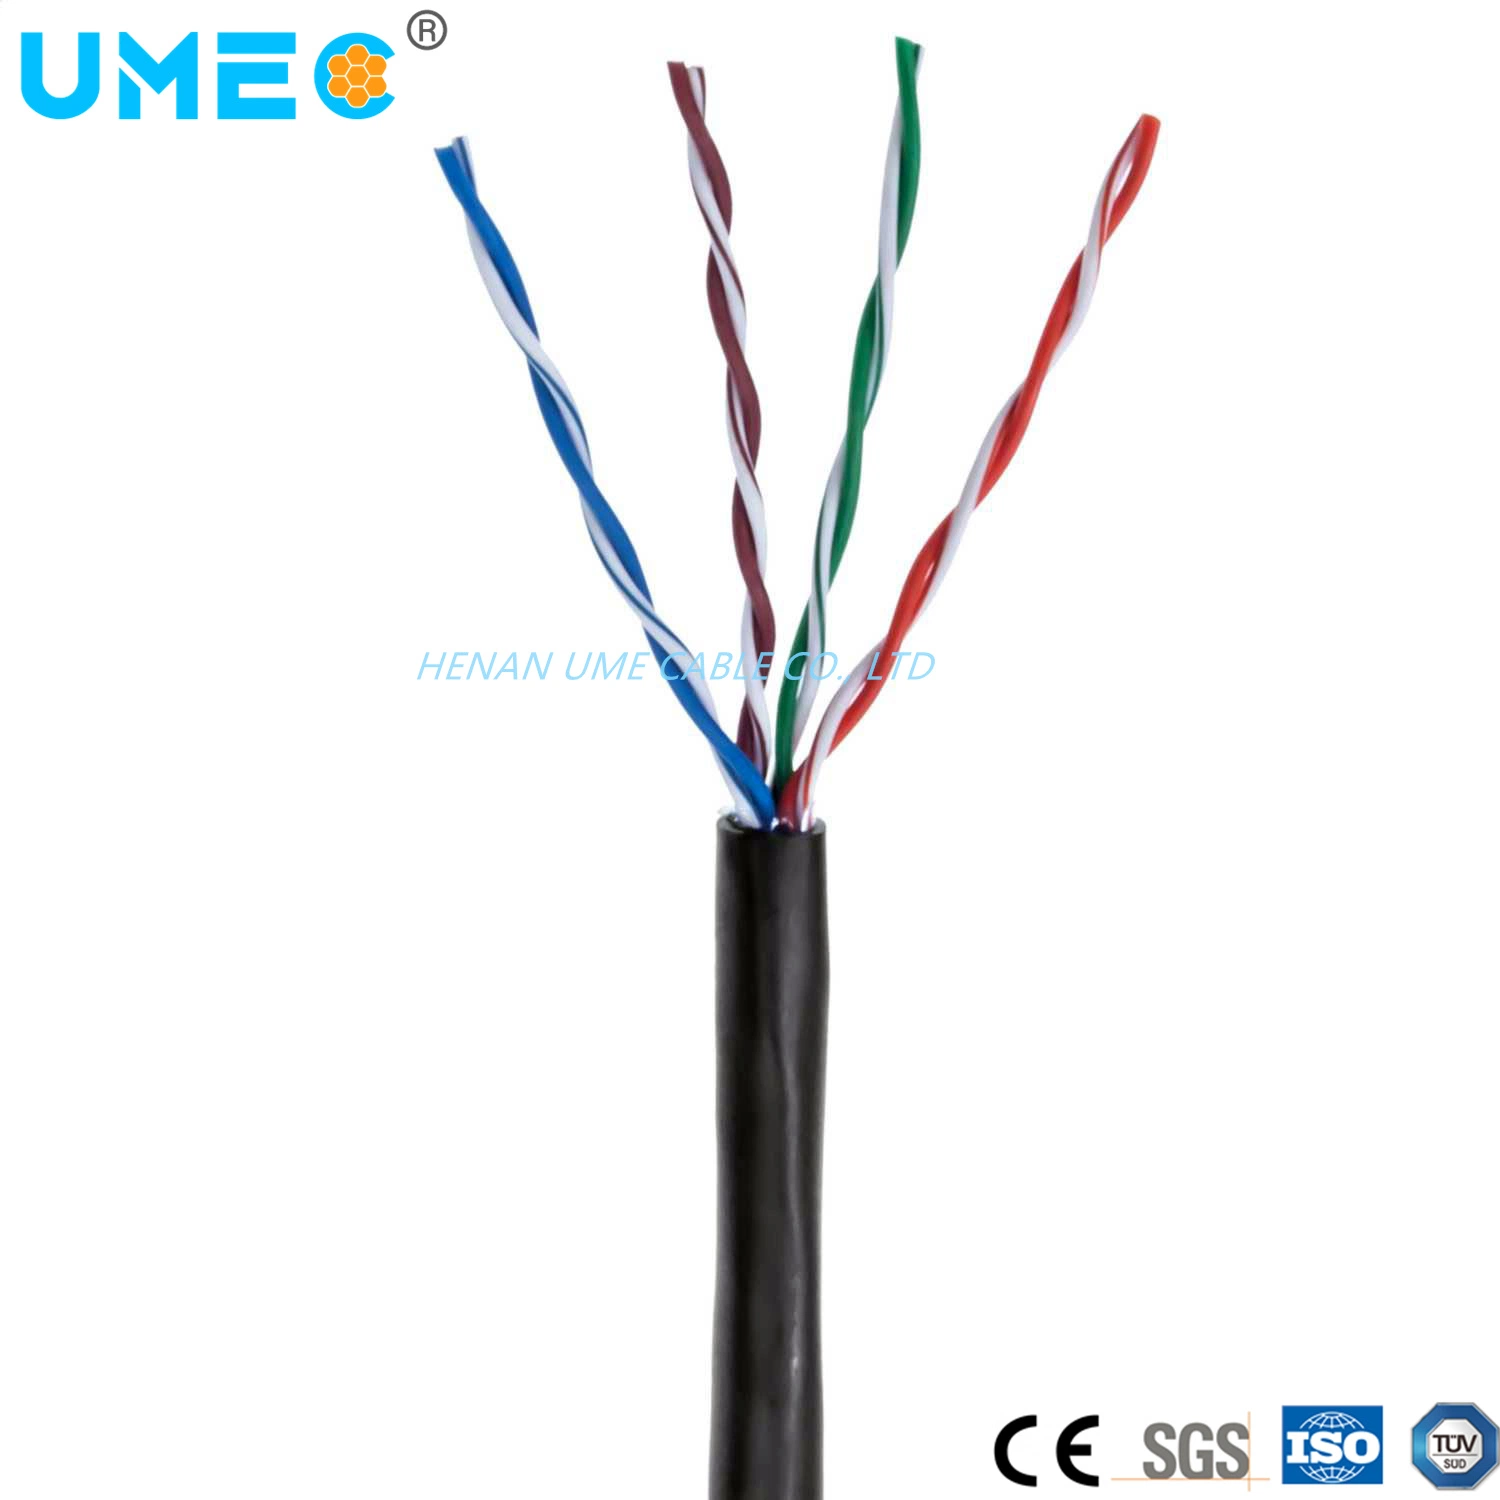 Good/High quality/High cost performance  Data LAN Ethernet Network Cable Network Cable CAT6 UTP Wall Socket Cable